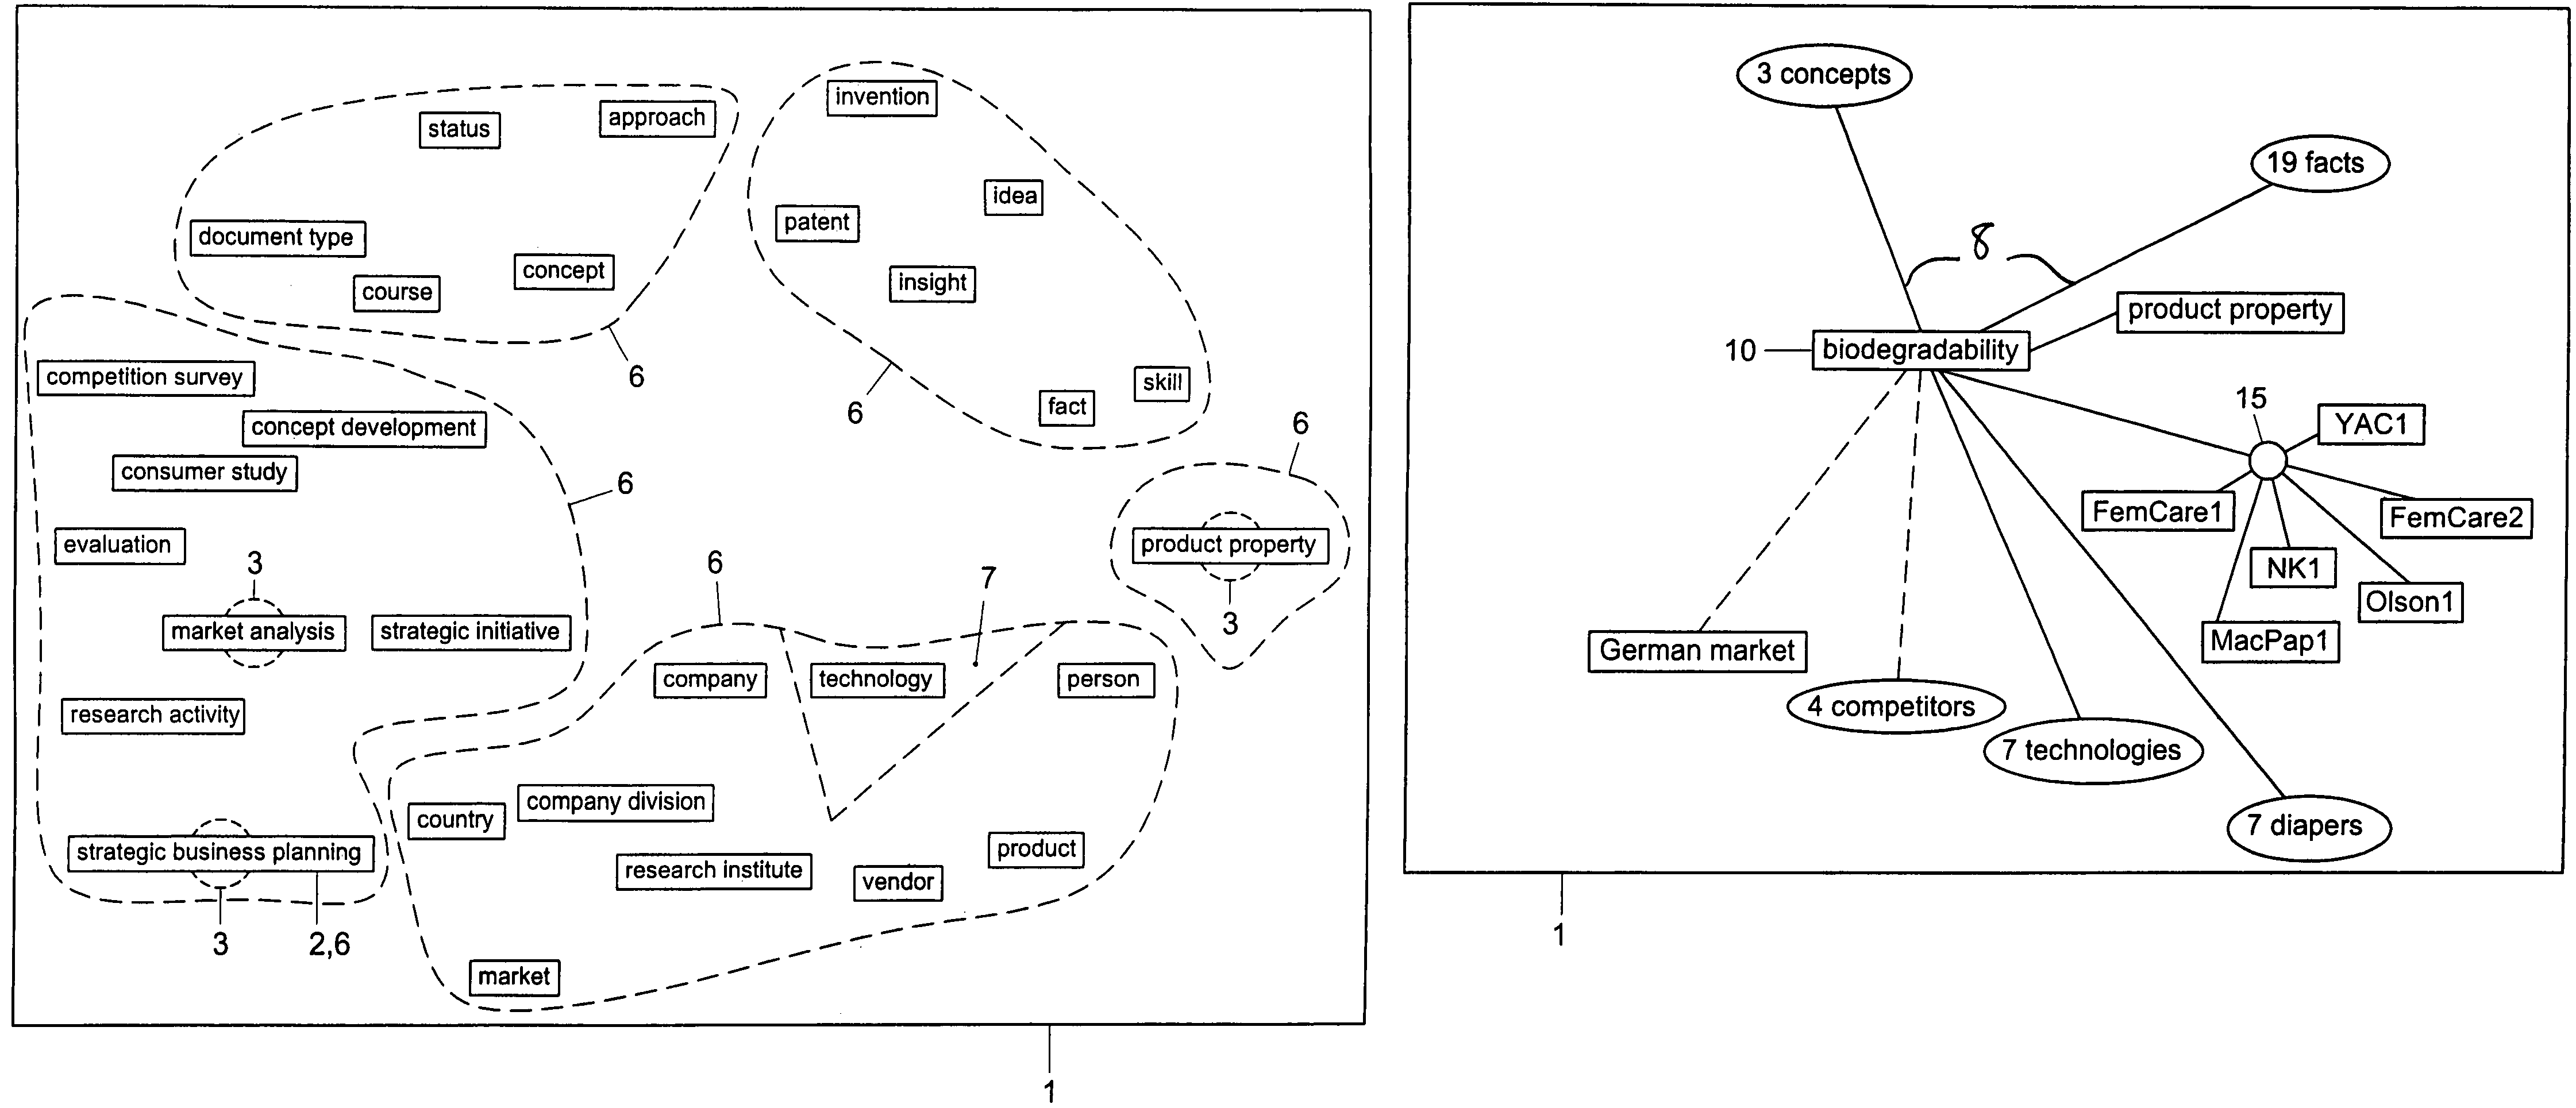 Method and system for restructuring a visualization graph so that entities linked to a common node are replaced by the common node in response to a predetermined stimulus